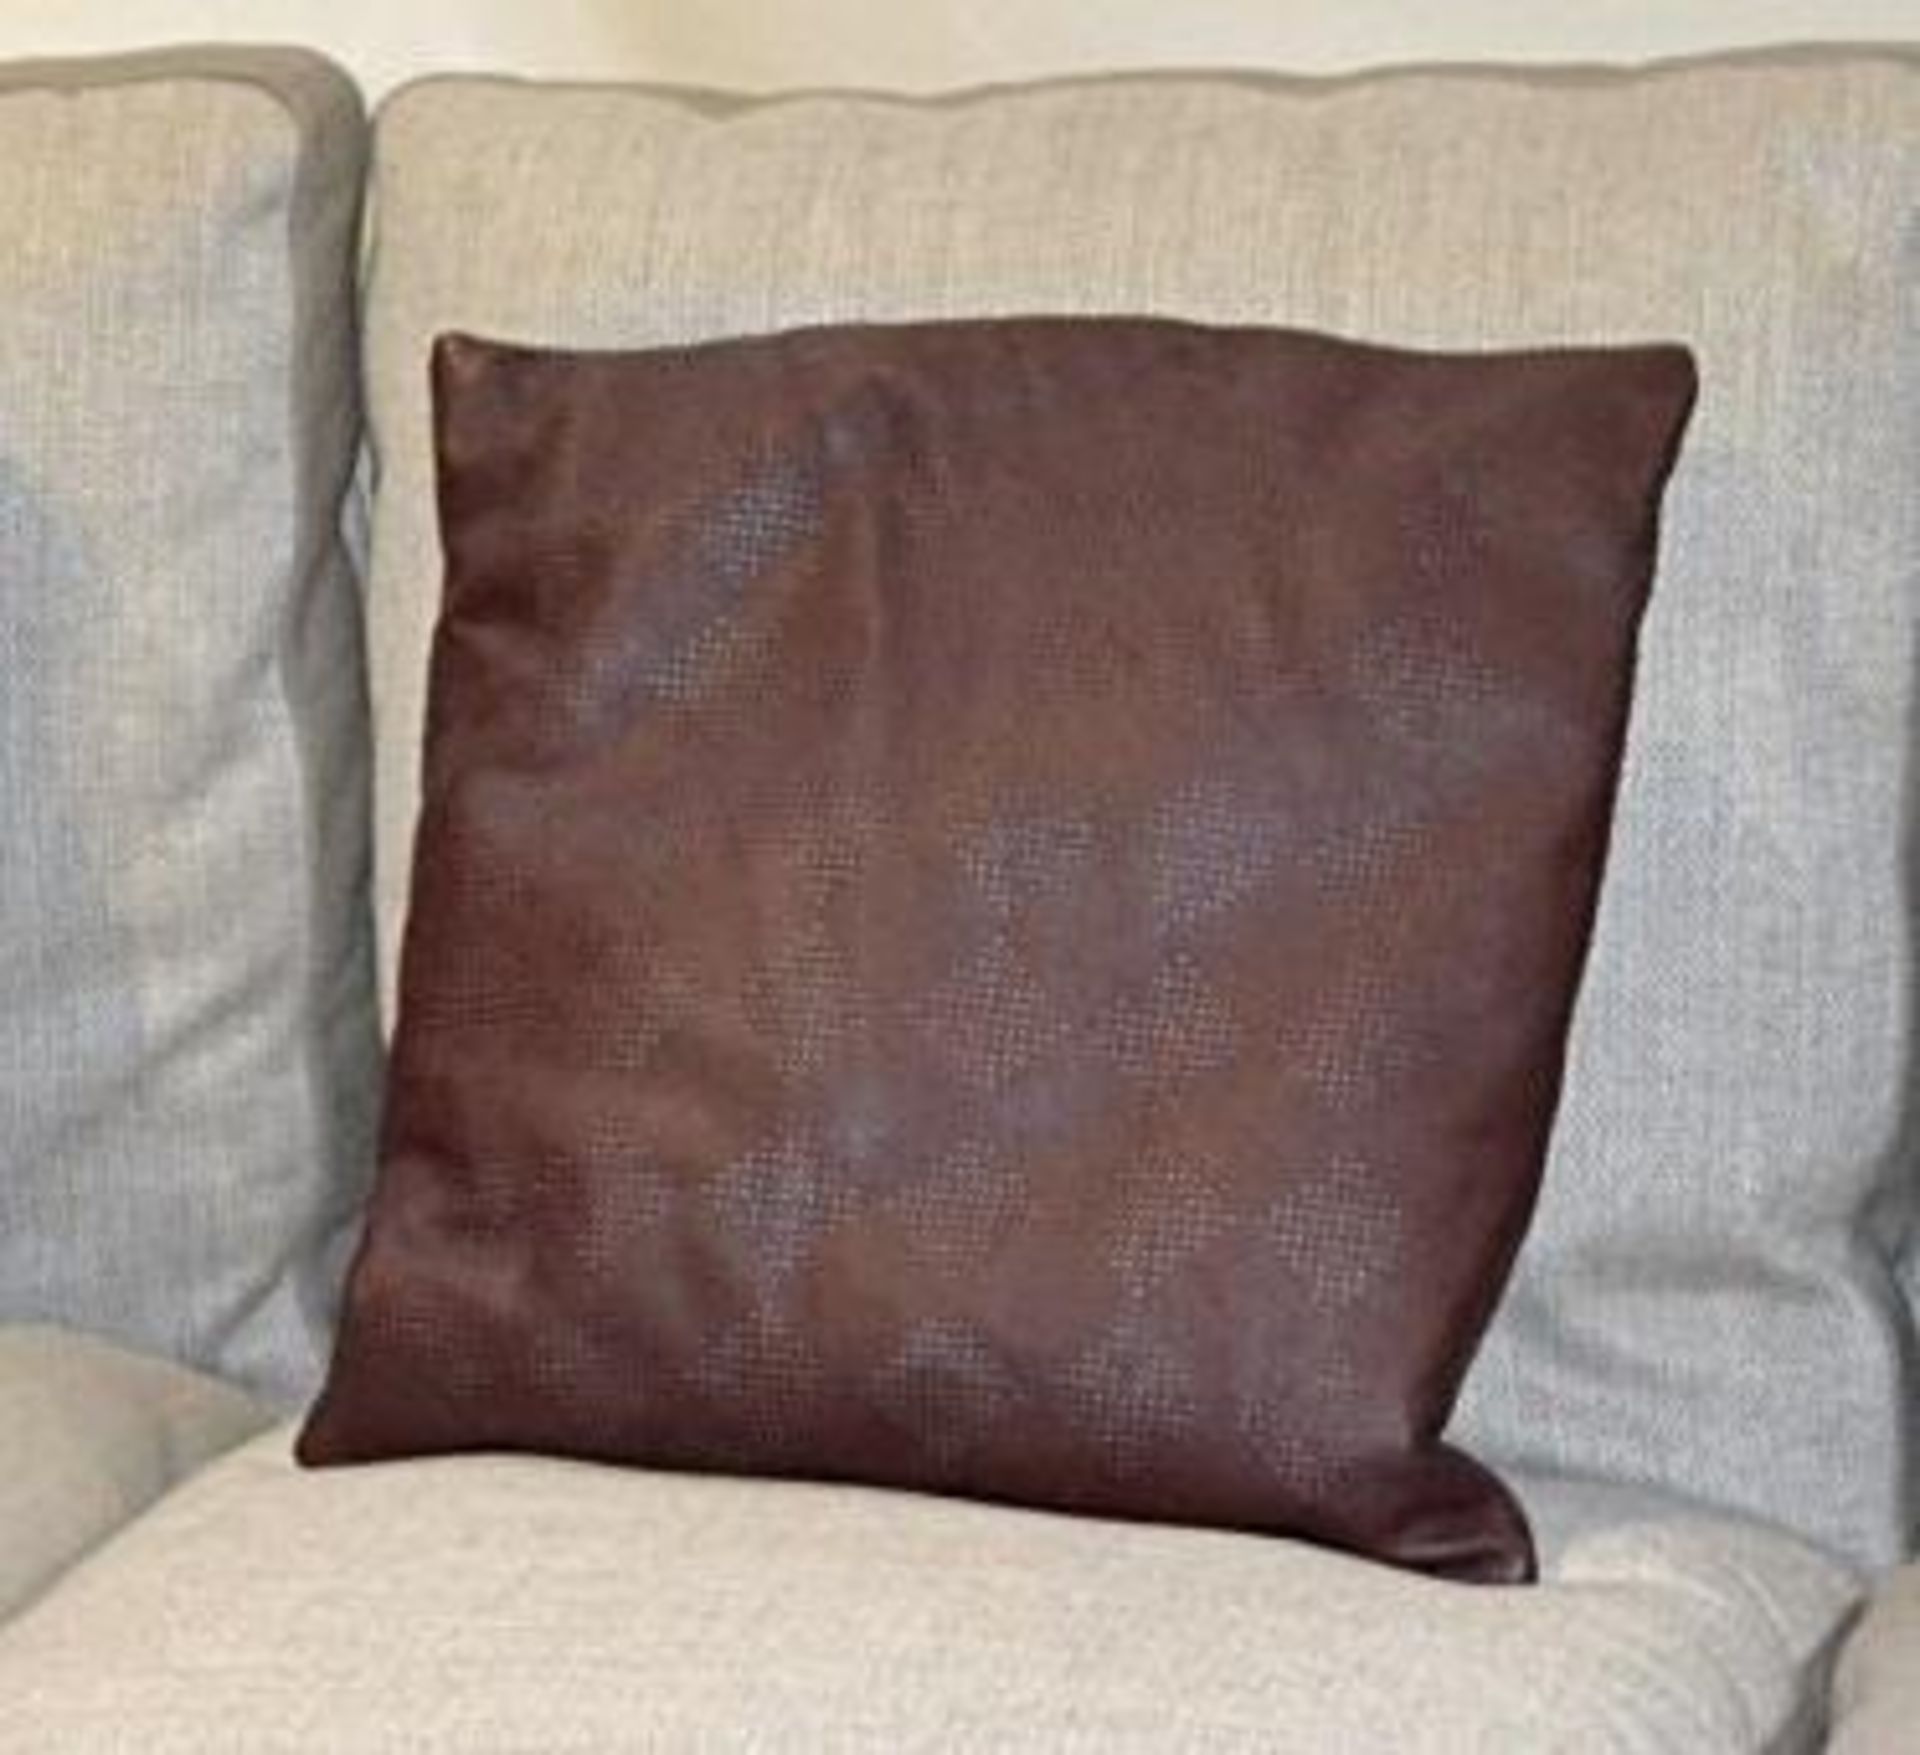 3 x POLTRONA FRAU&nbsp;Goose Down Scatter Cushions In A Burgundy Leather With A Diamond Motif - Dime - Image 3 of 4